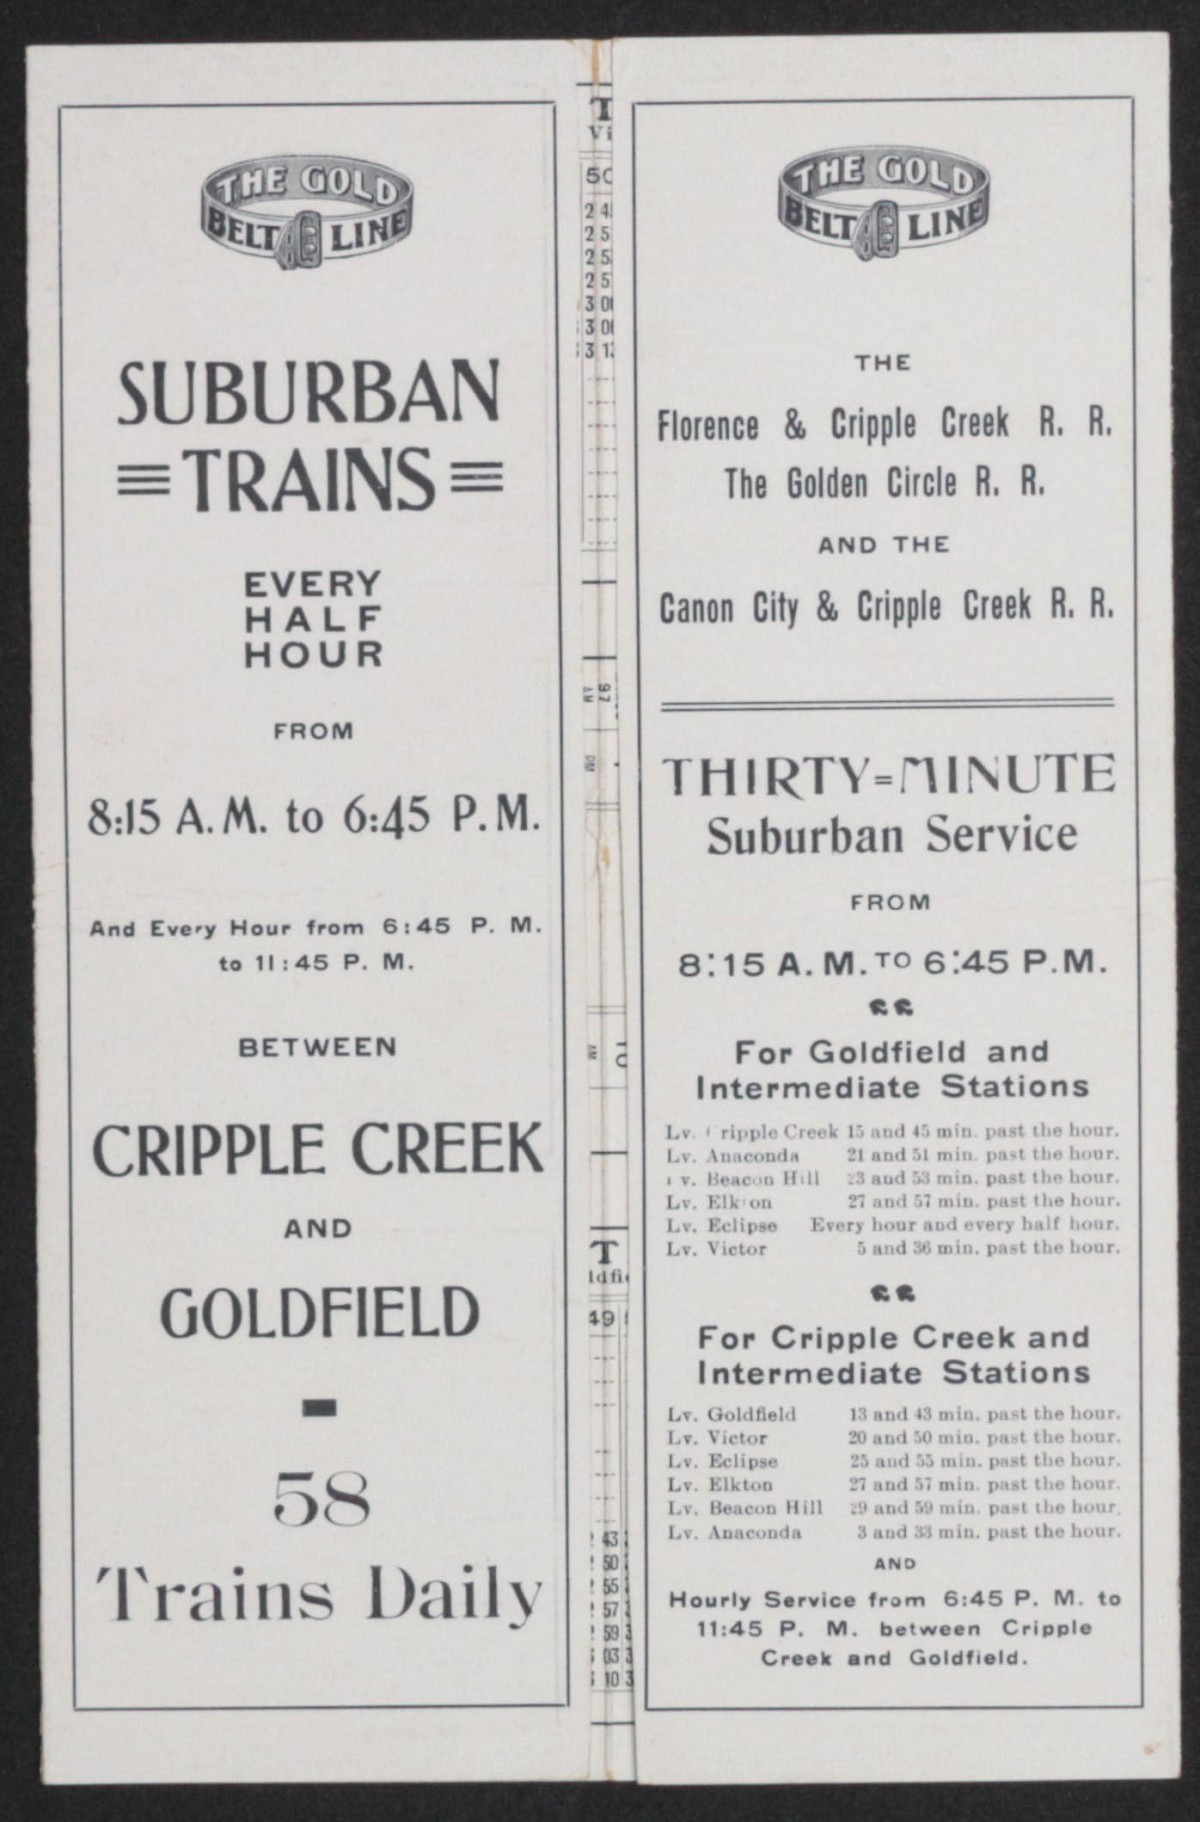 THE GOLD BELT LINE TIMETABLE FOR 1903